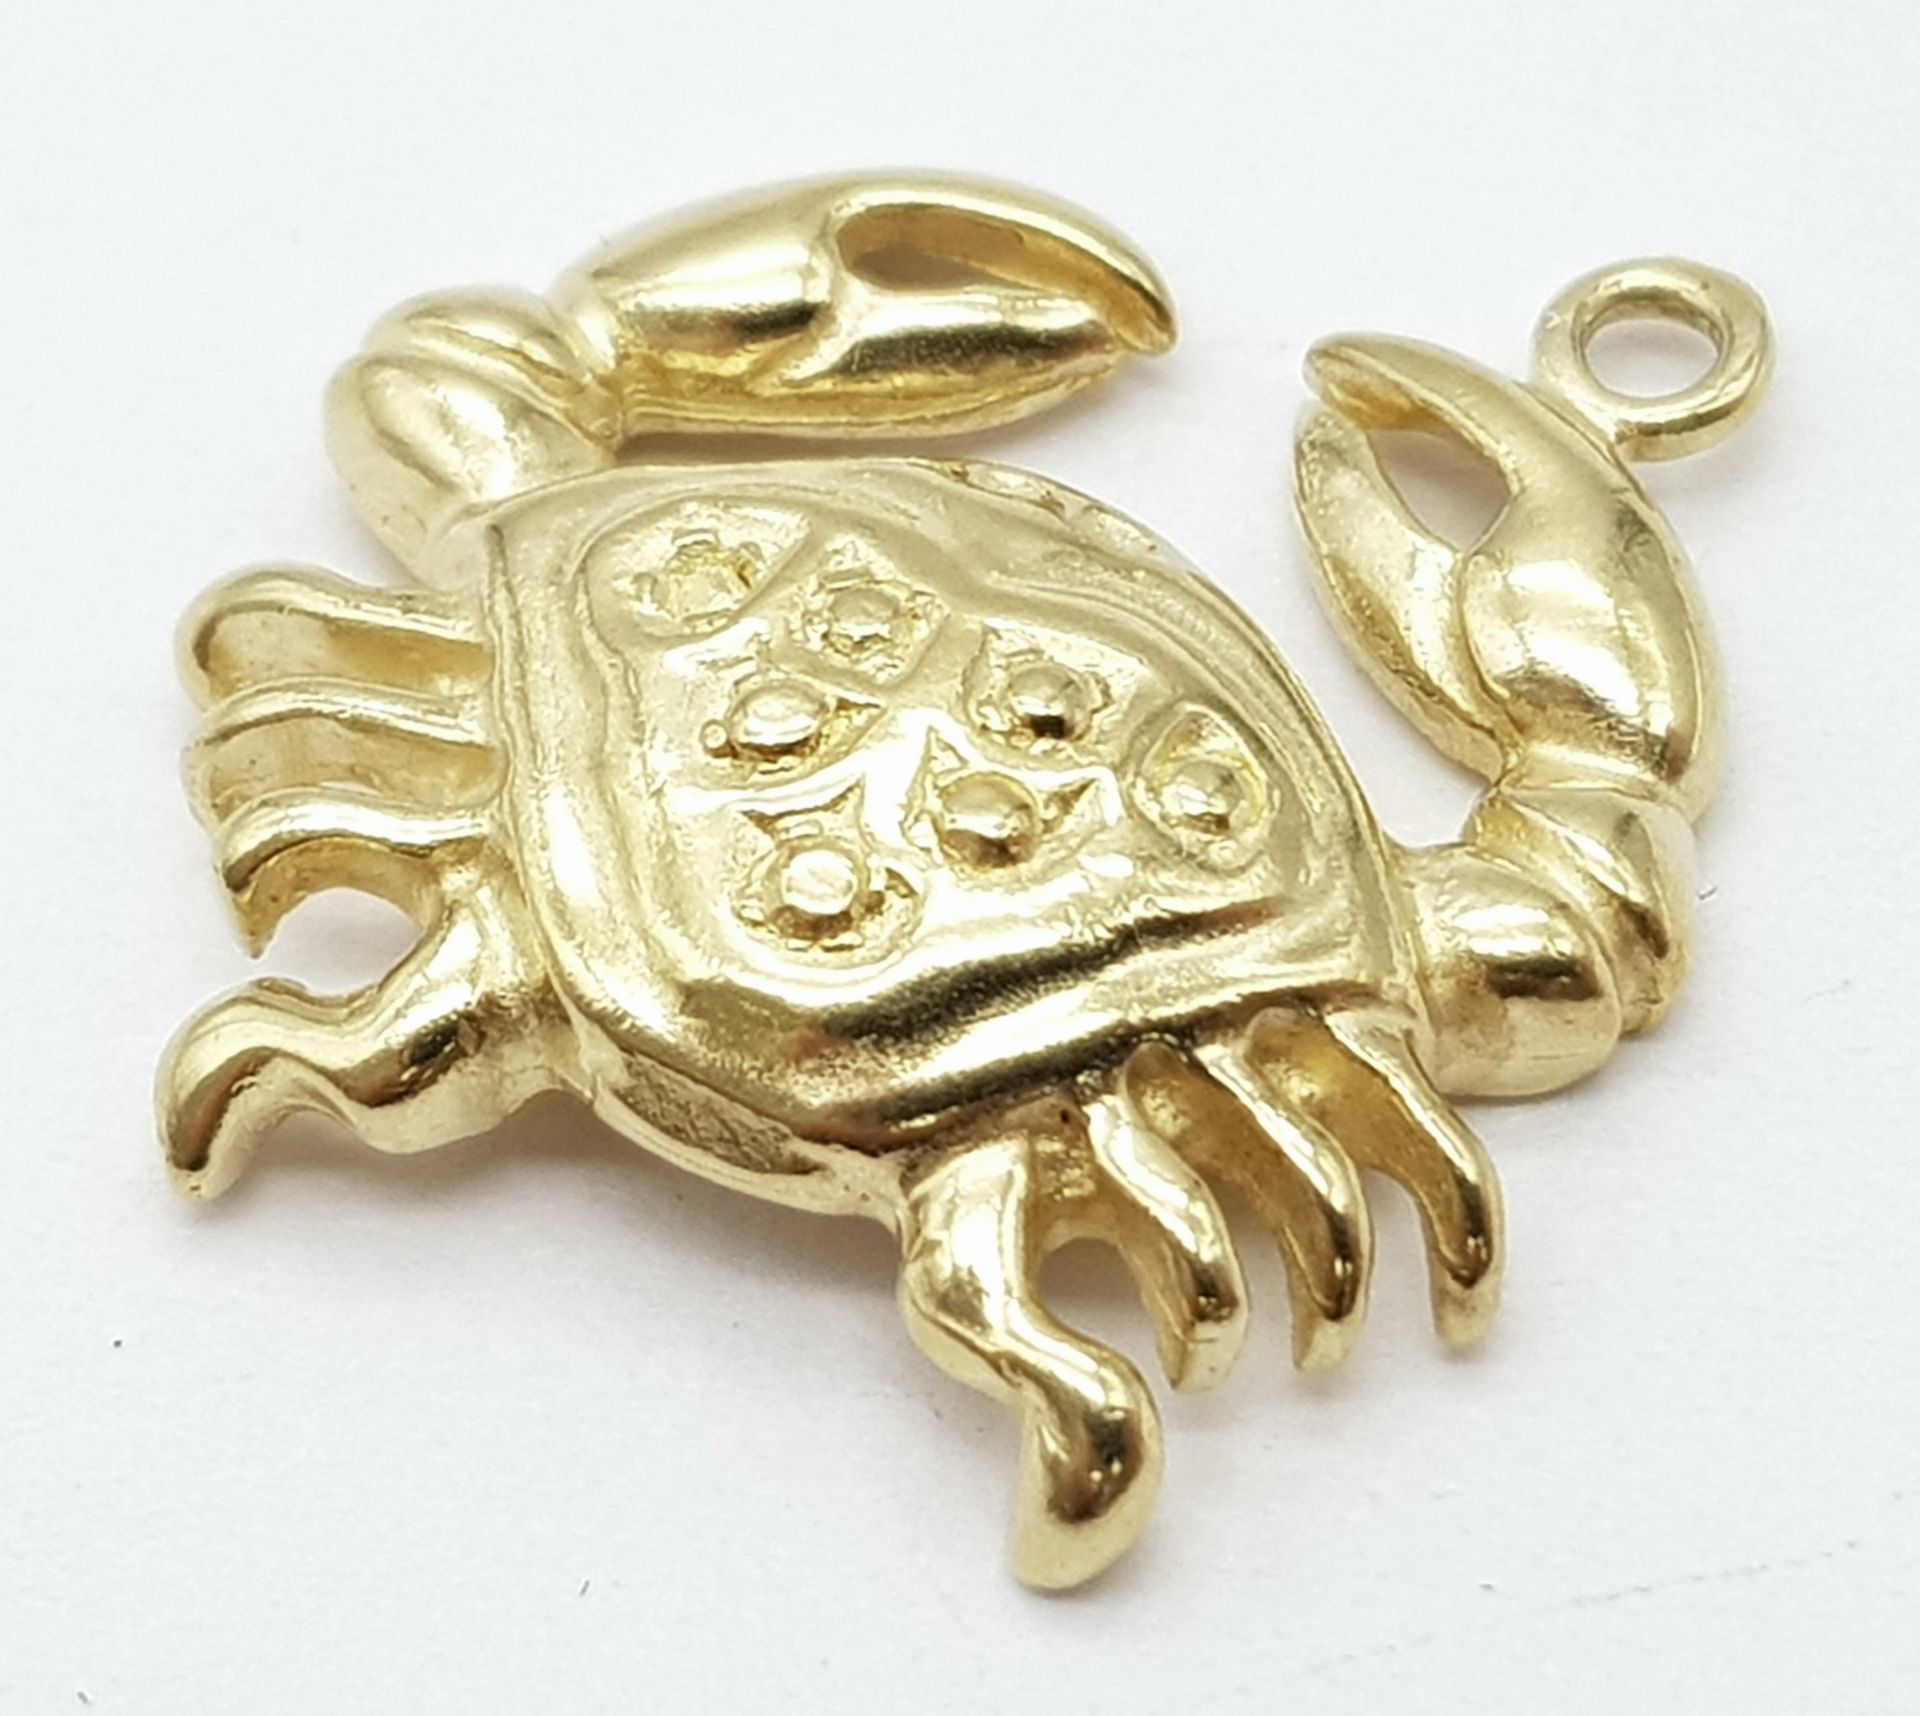 A 9K Yellow Gold Crab (cancer) Star Sign Pendant. 2.48g. 2cm. Ref: 629761K.